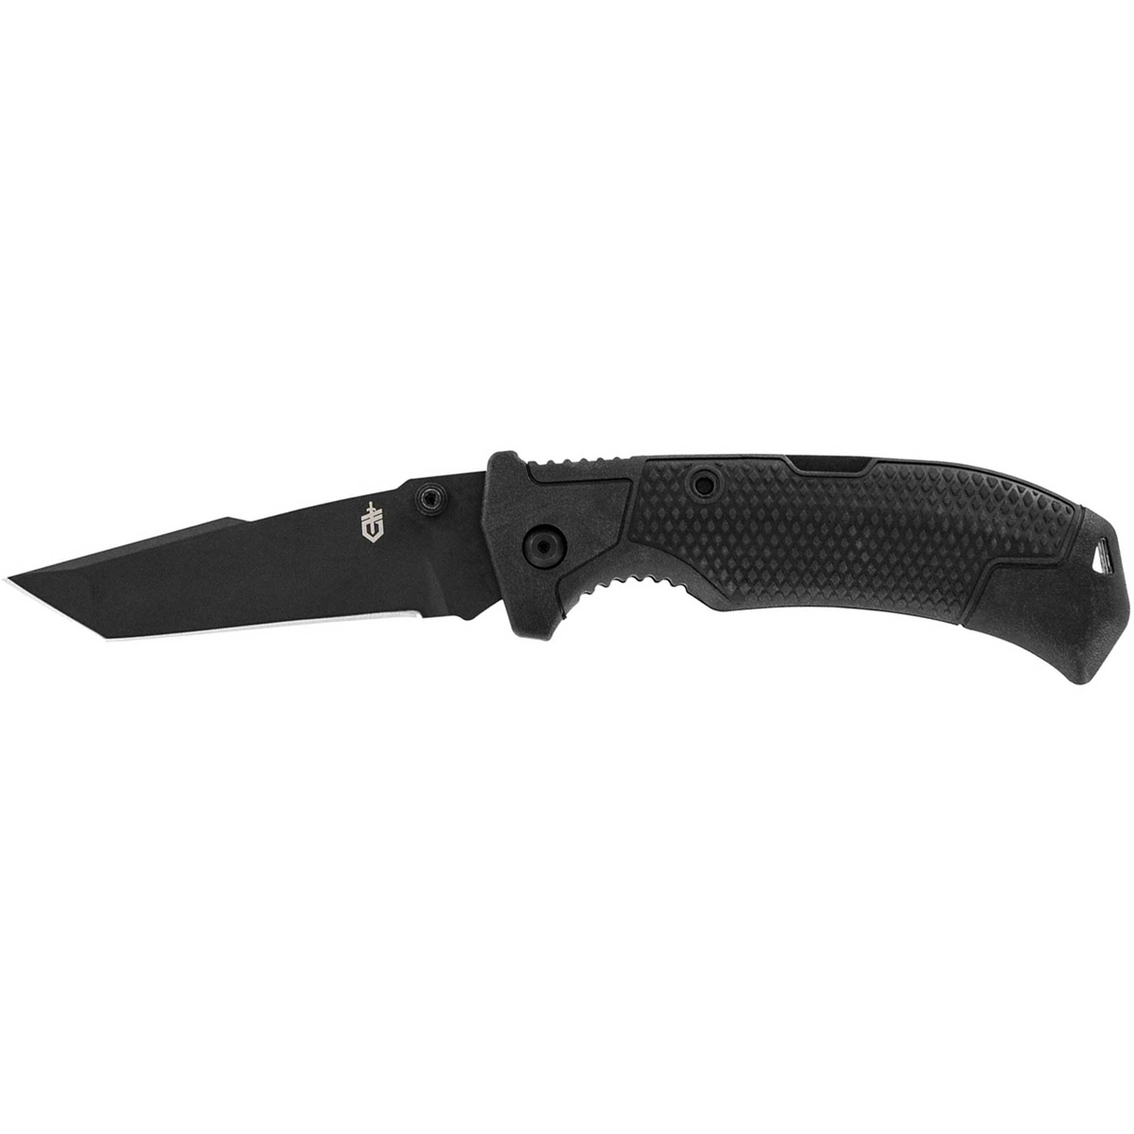 Gerber Knives and Tools Edict Folding Knife